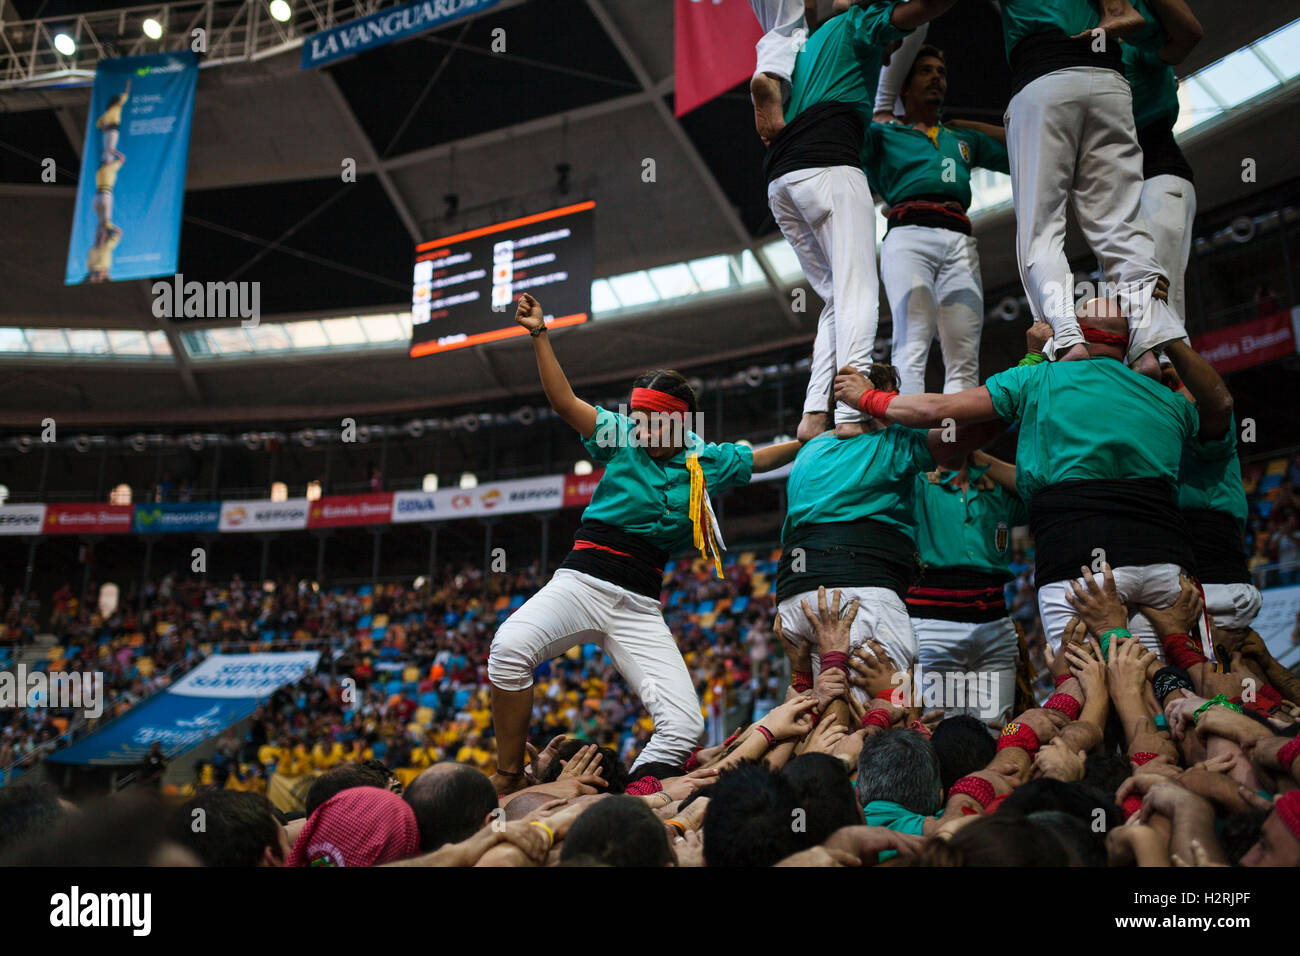 Tarragona, Spain. 01st Oct, 2016. Castellers performing at the International human tower competition in Tarragona, Spain. Participants at the International human tower competition trying to create higher and more complex towers  than anyone else. Credit:  Tom Bourdon/Alamy Live News Stock Photo